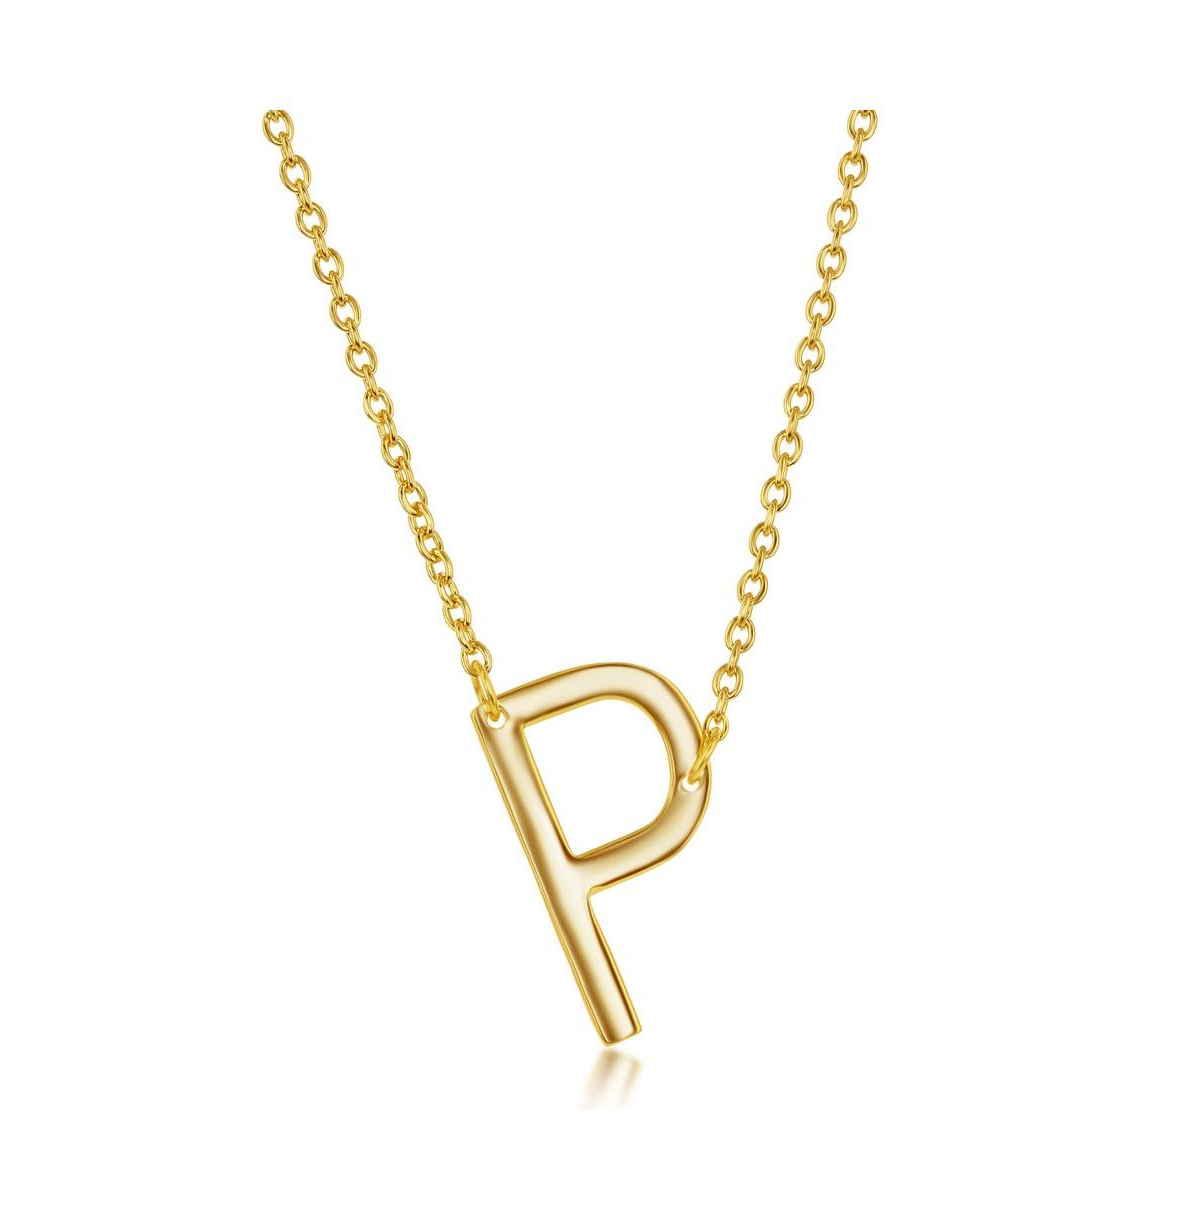 Gold Tone Sideways Initial Necklace - Gold p